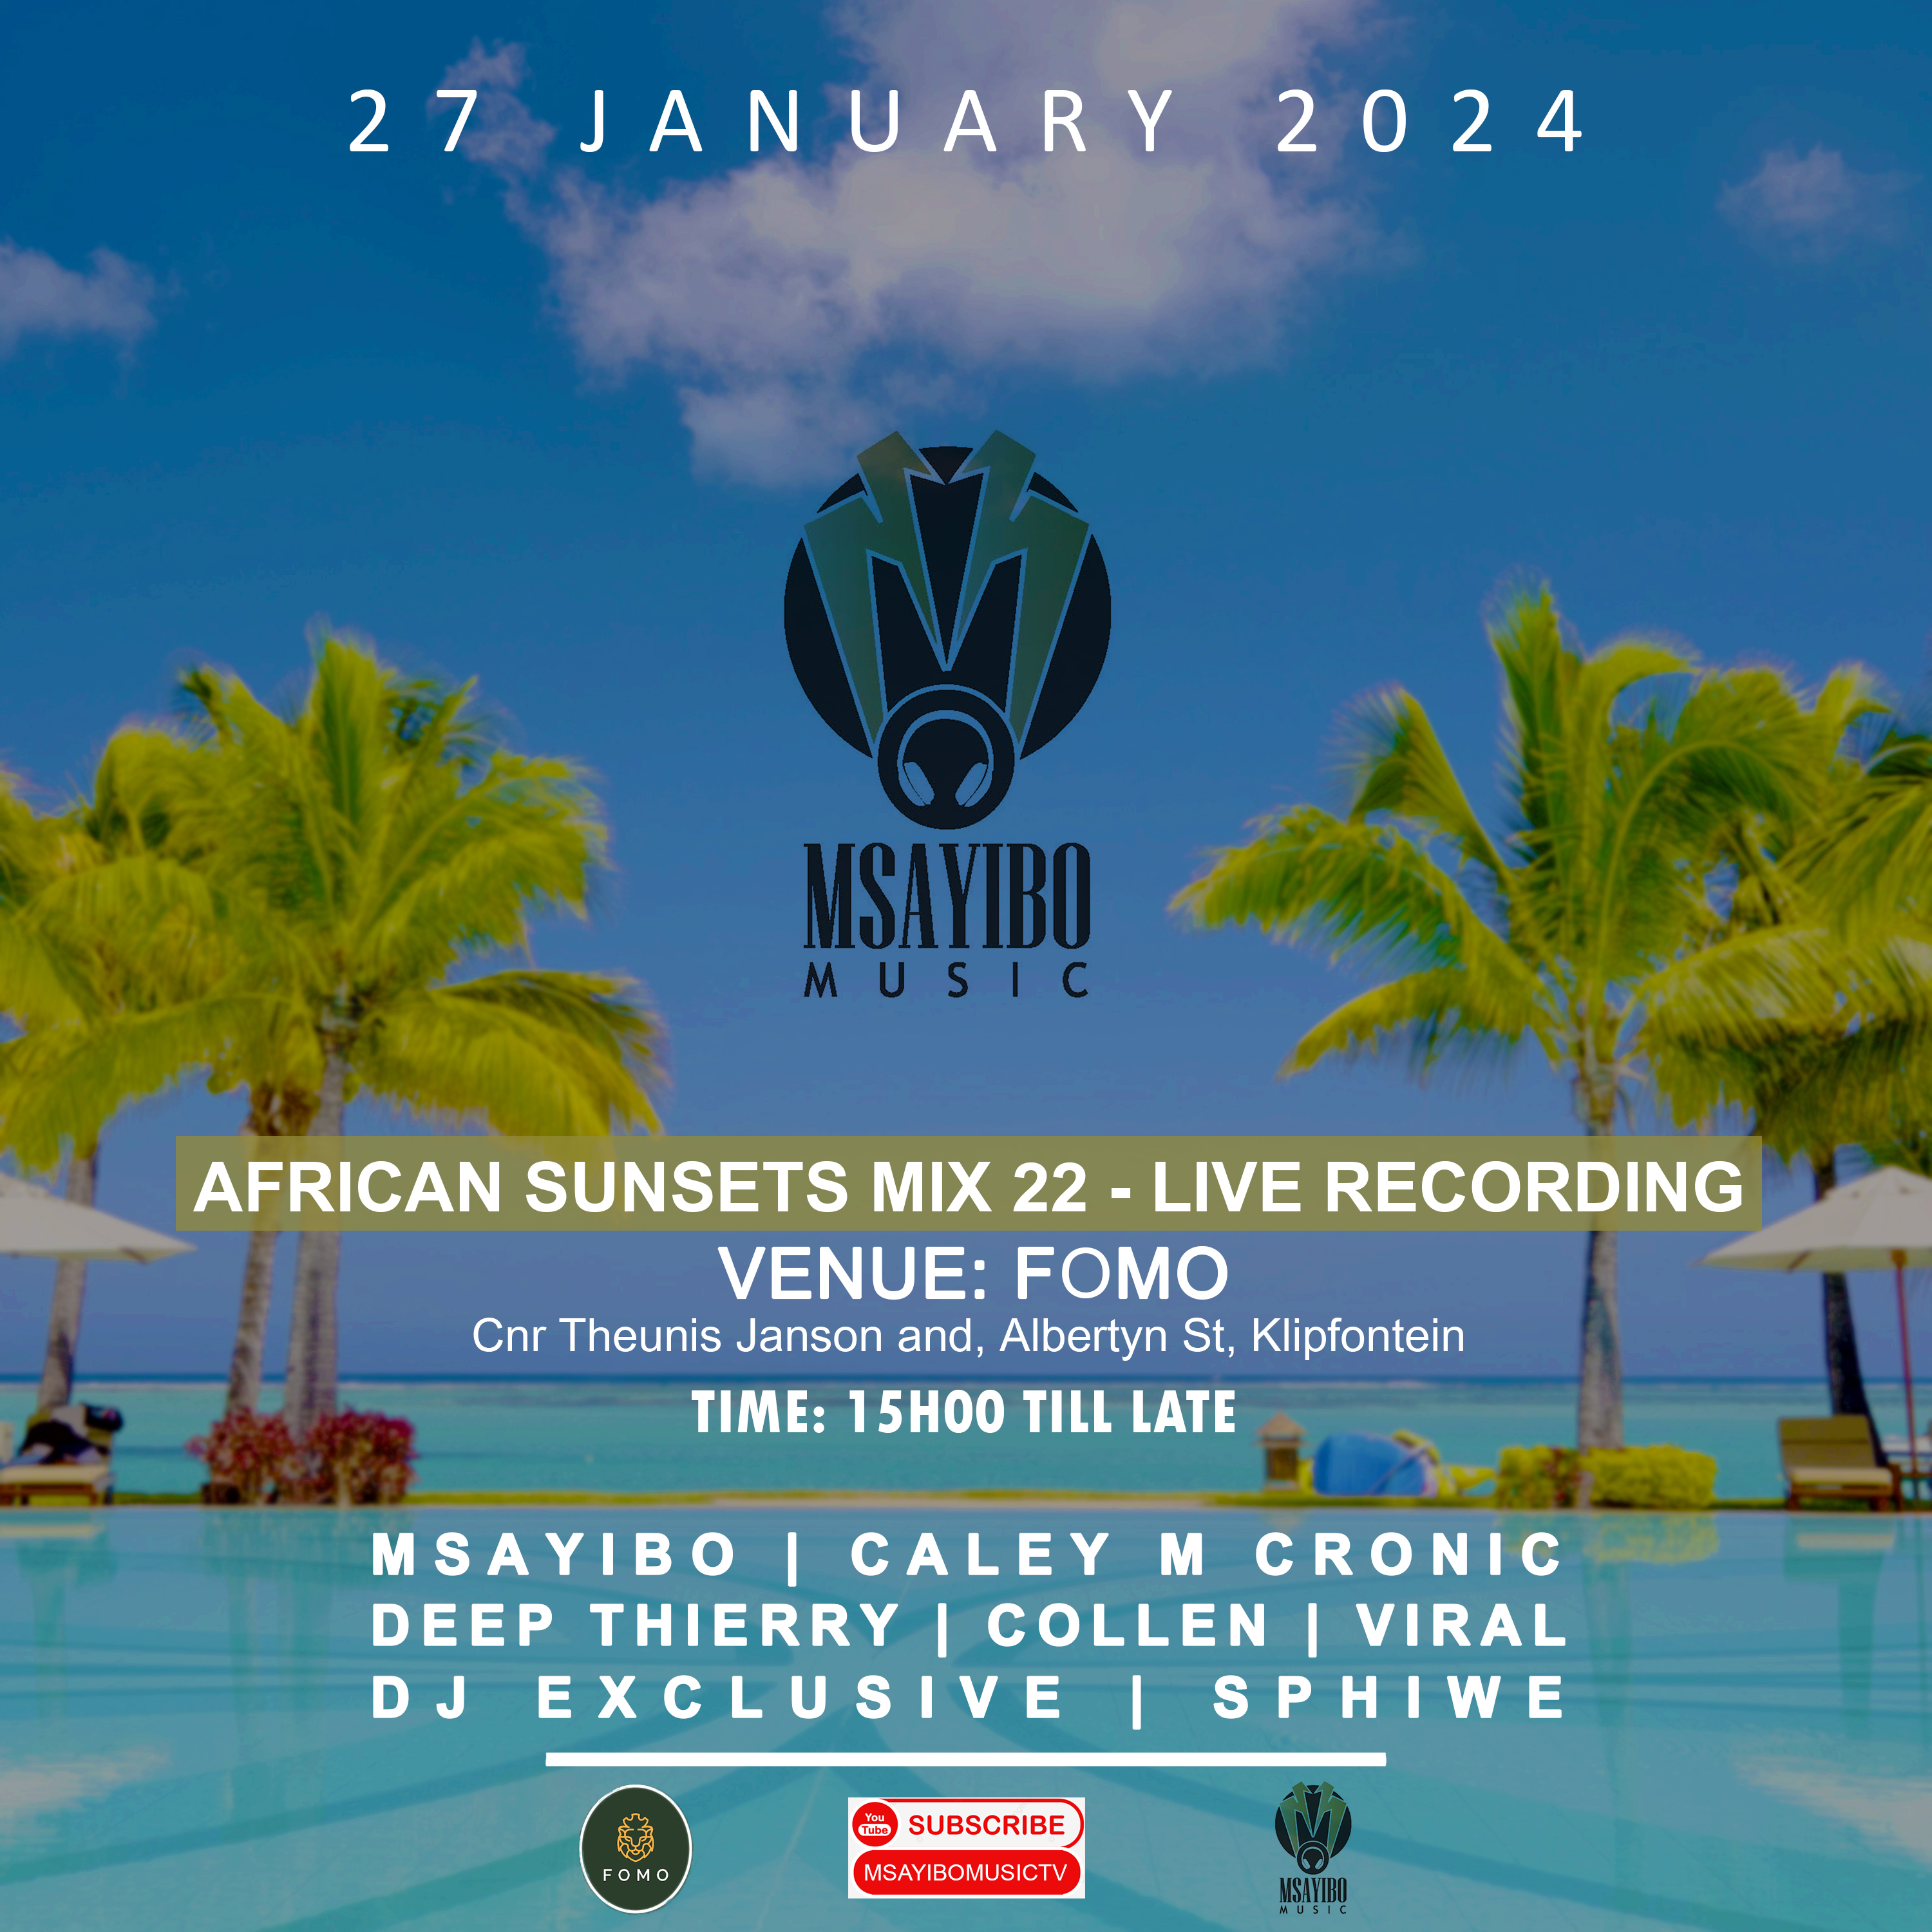 African Sunset Mix 22 Live Recording Poster